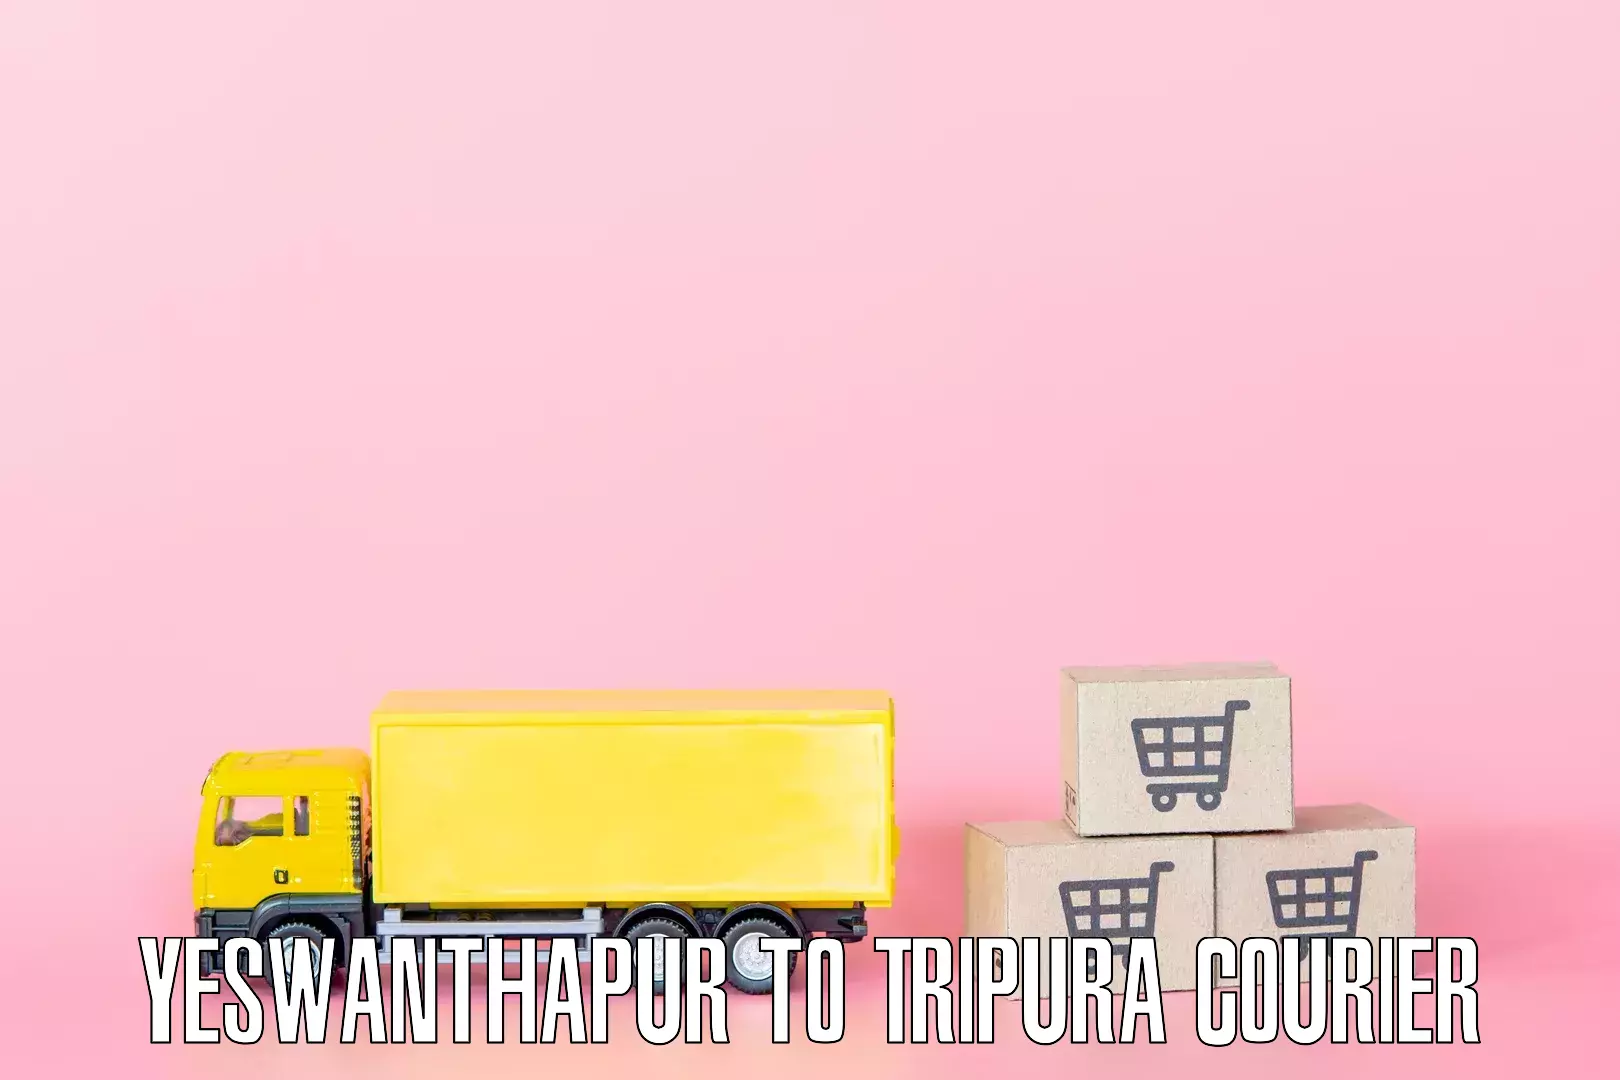 Household transport experts Yeswanthapur to Kamalpur